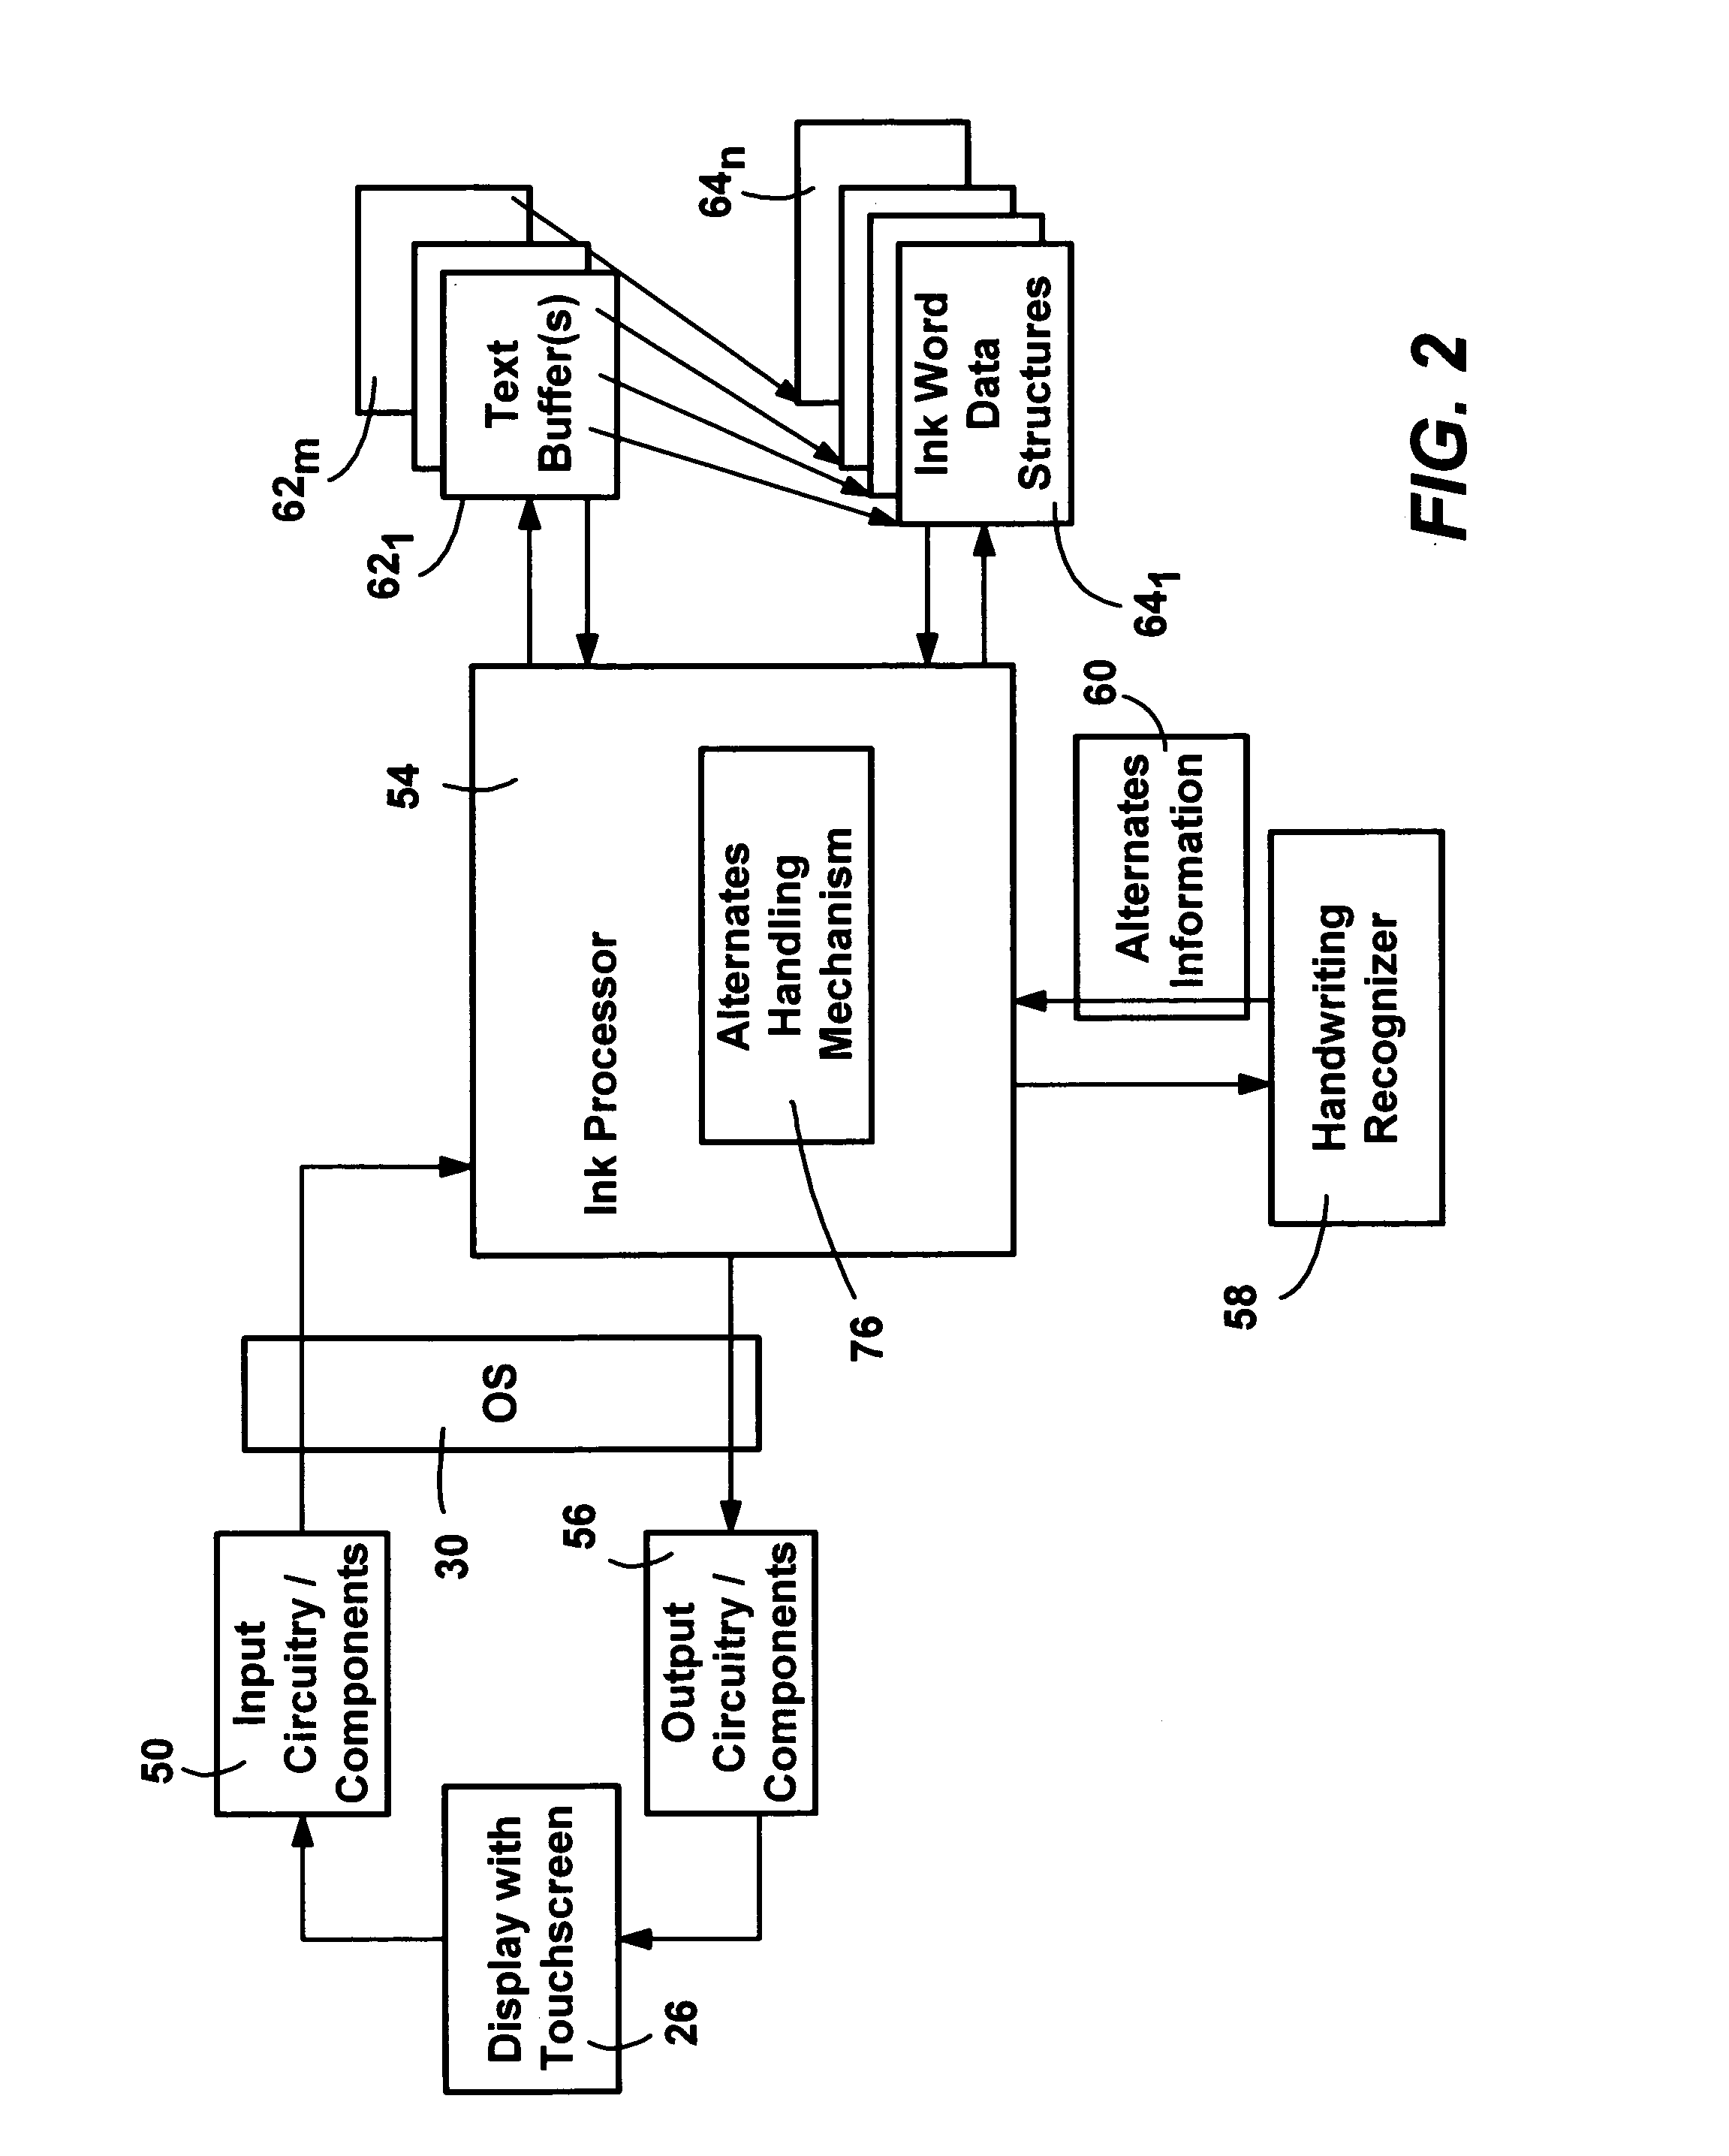 Method and system of handling the selection of alternates for recognized words